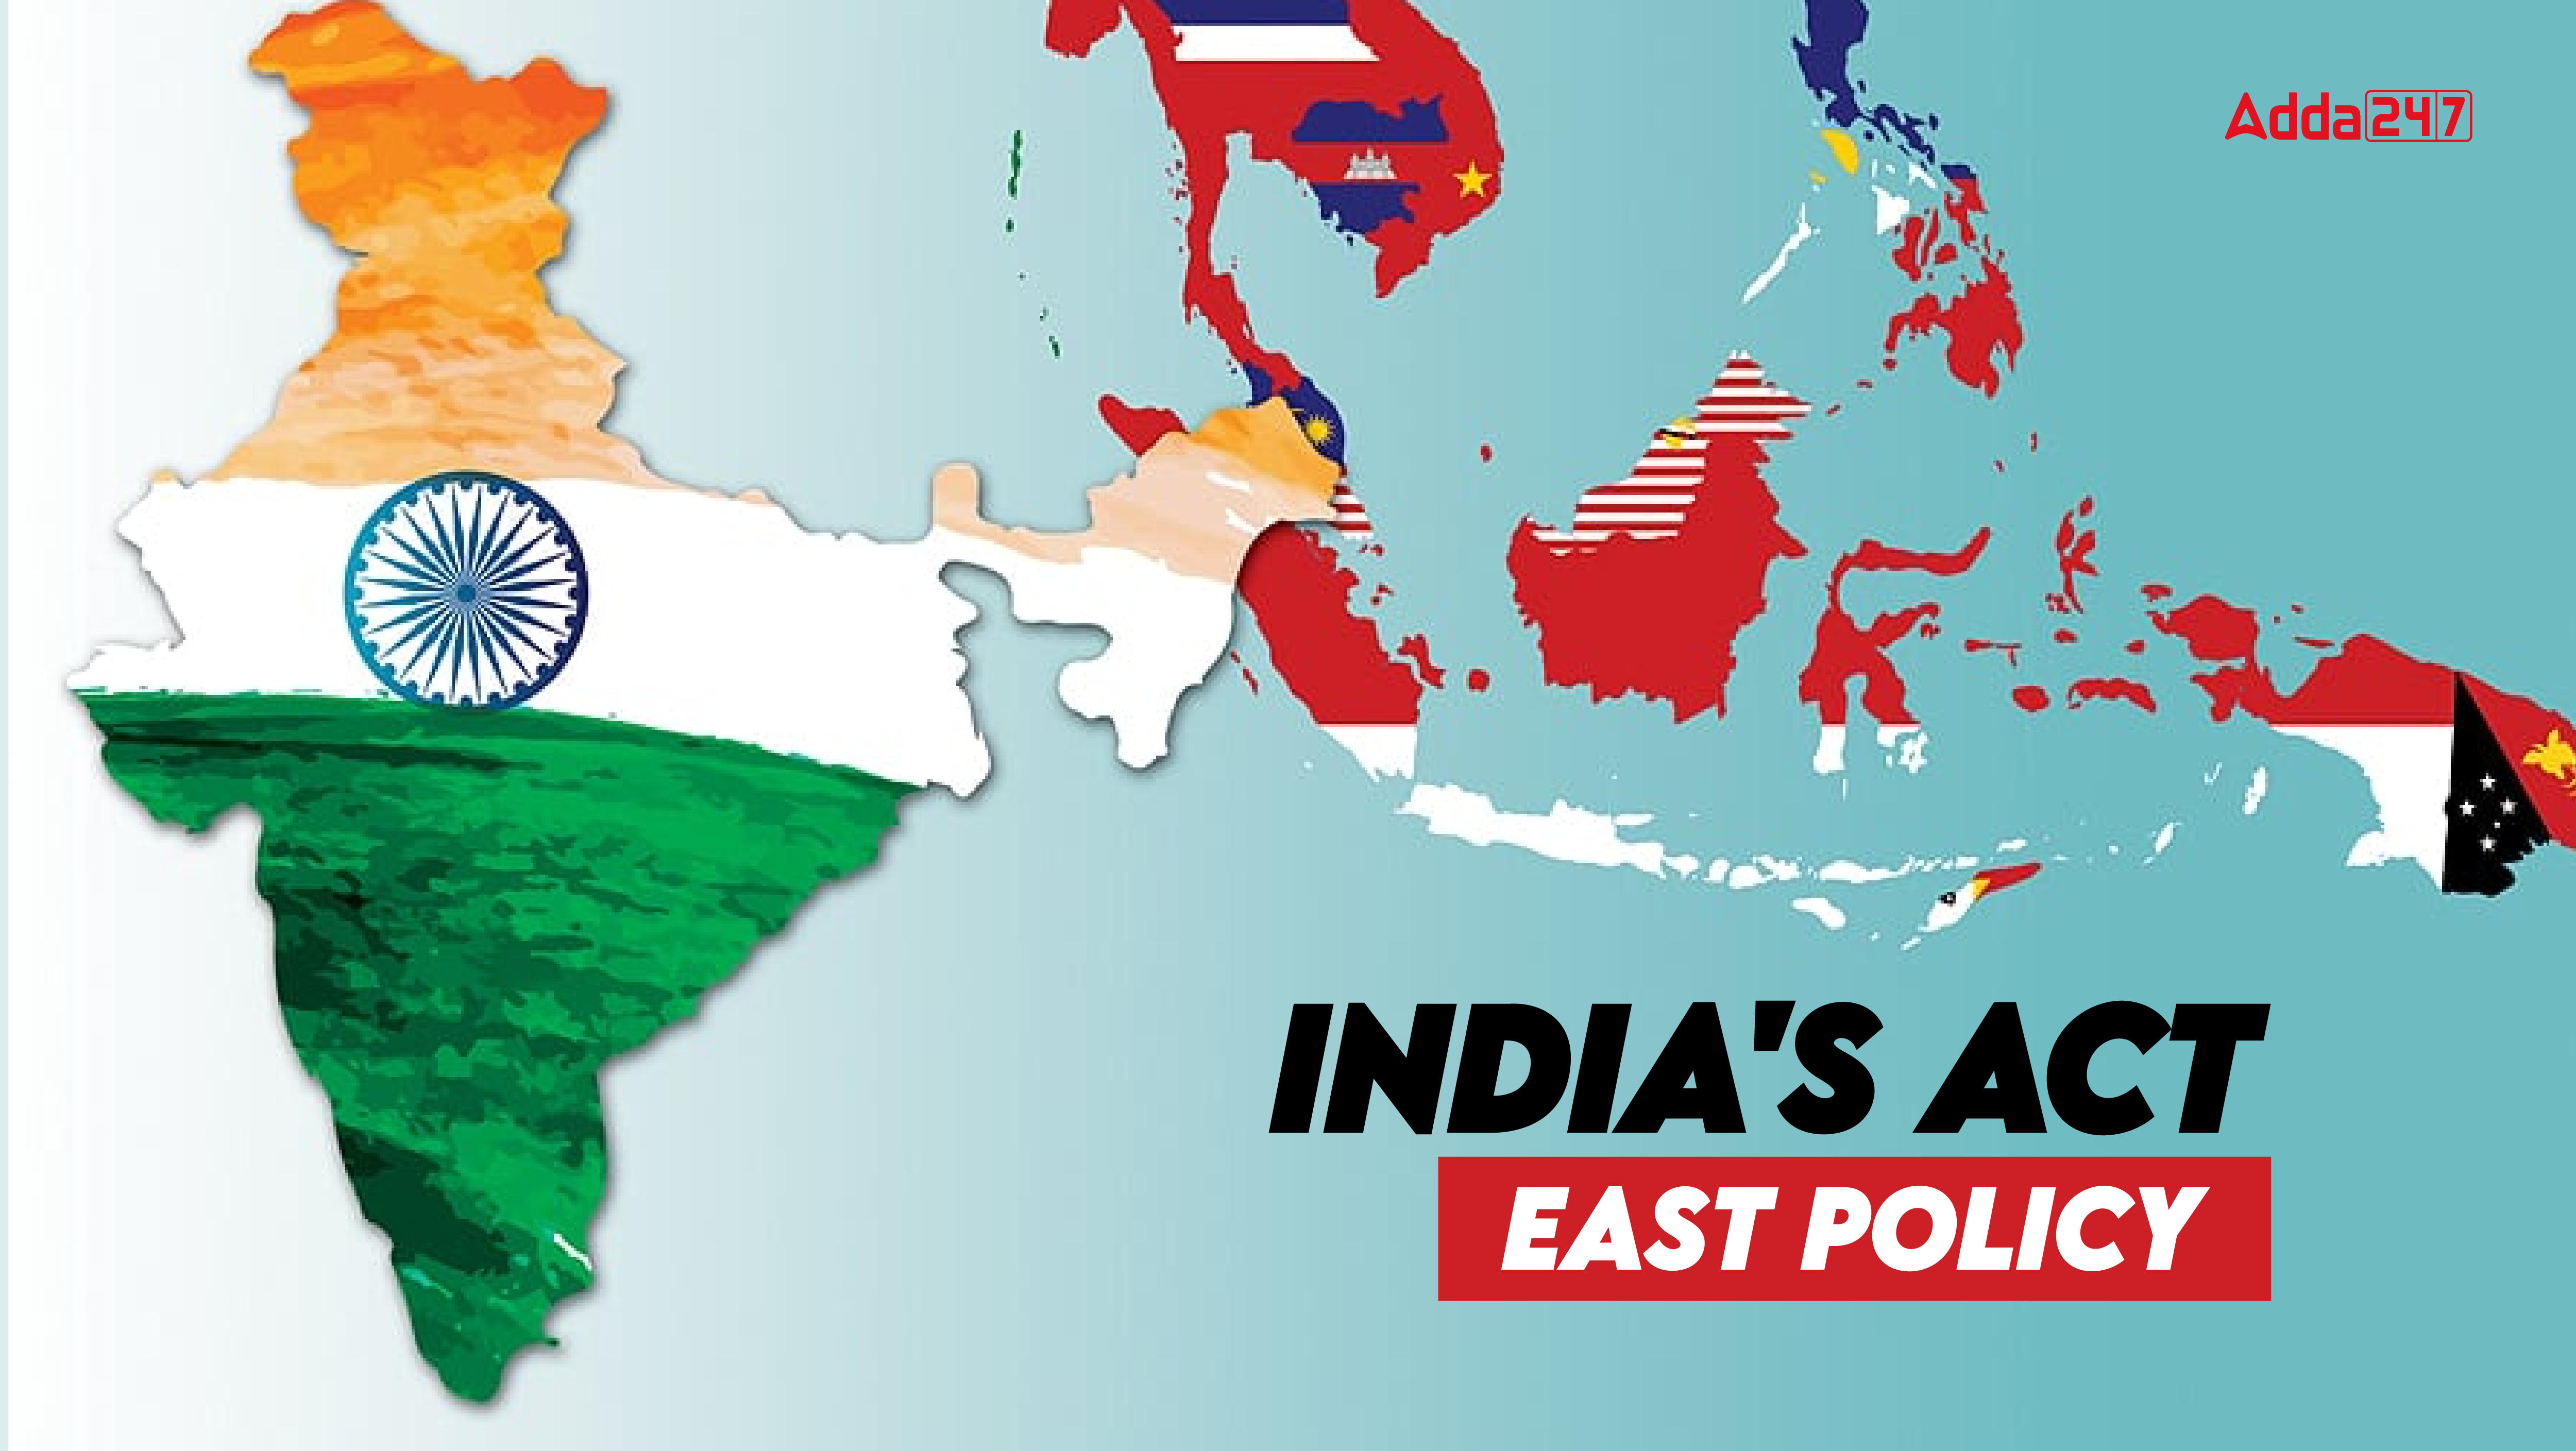 India's Act East Policy